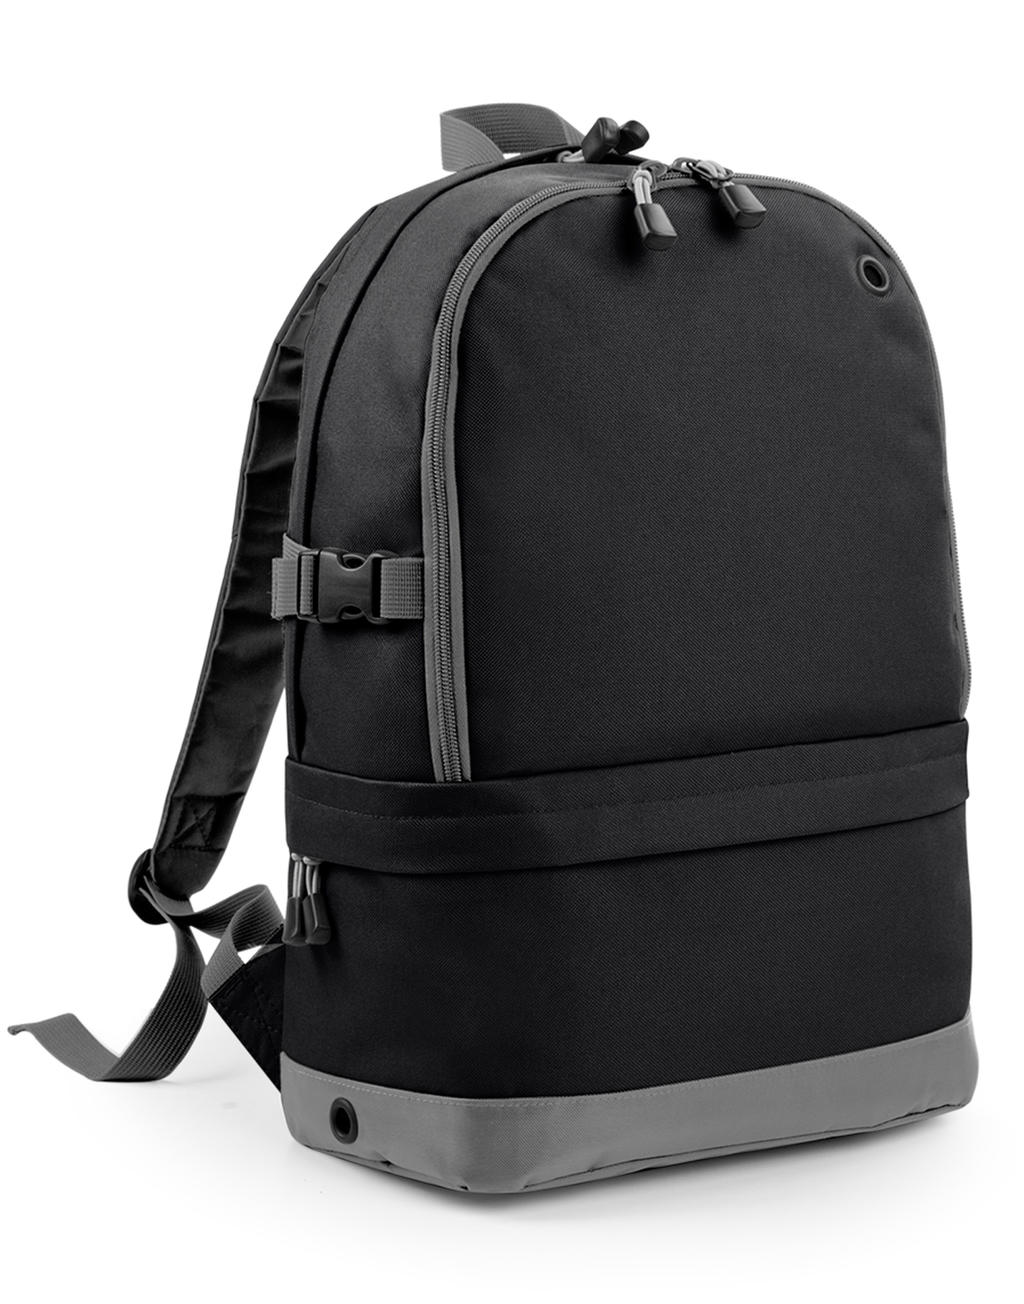  Athleisure Pro Backpack in Farbe Black